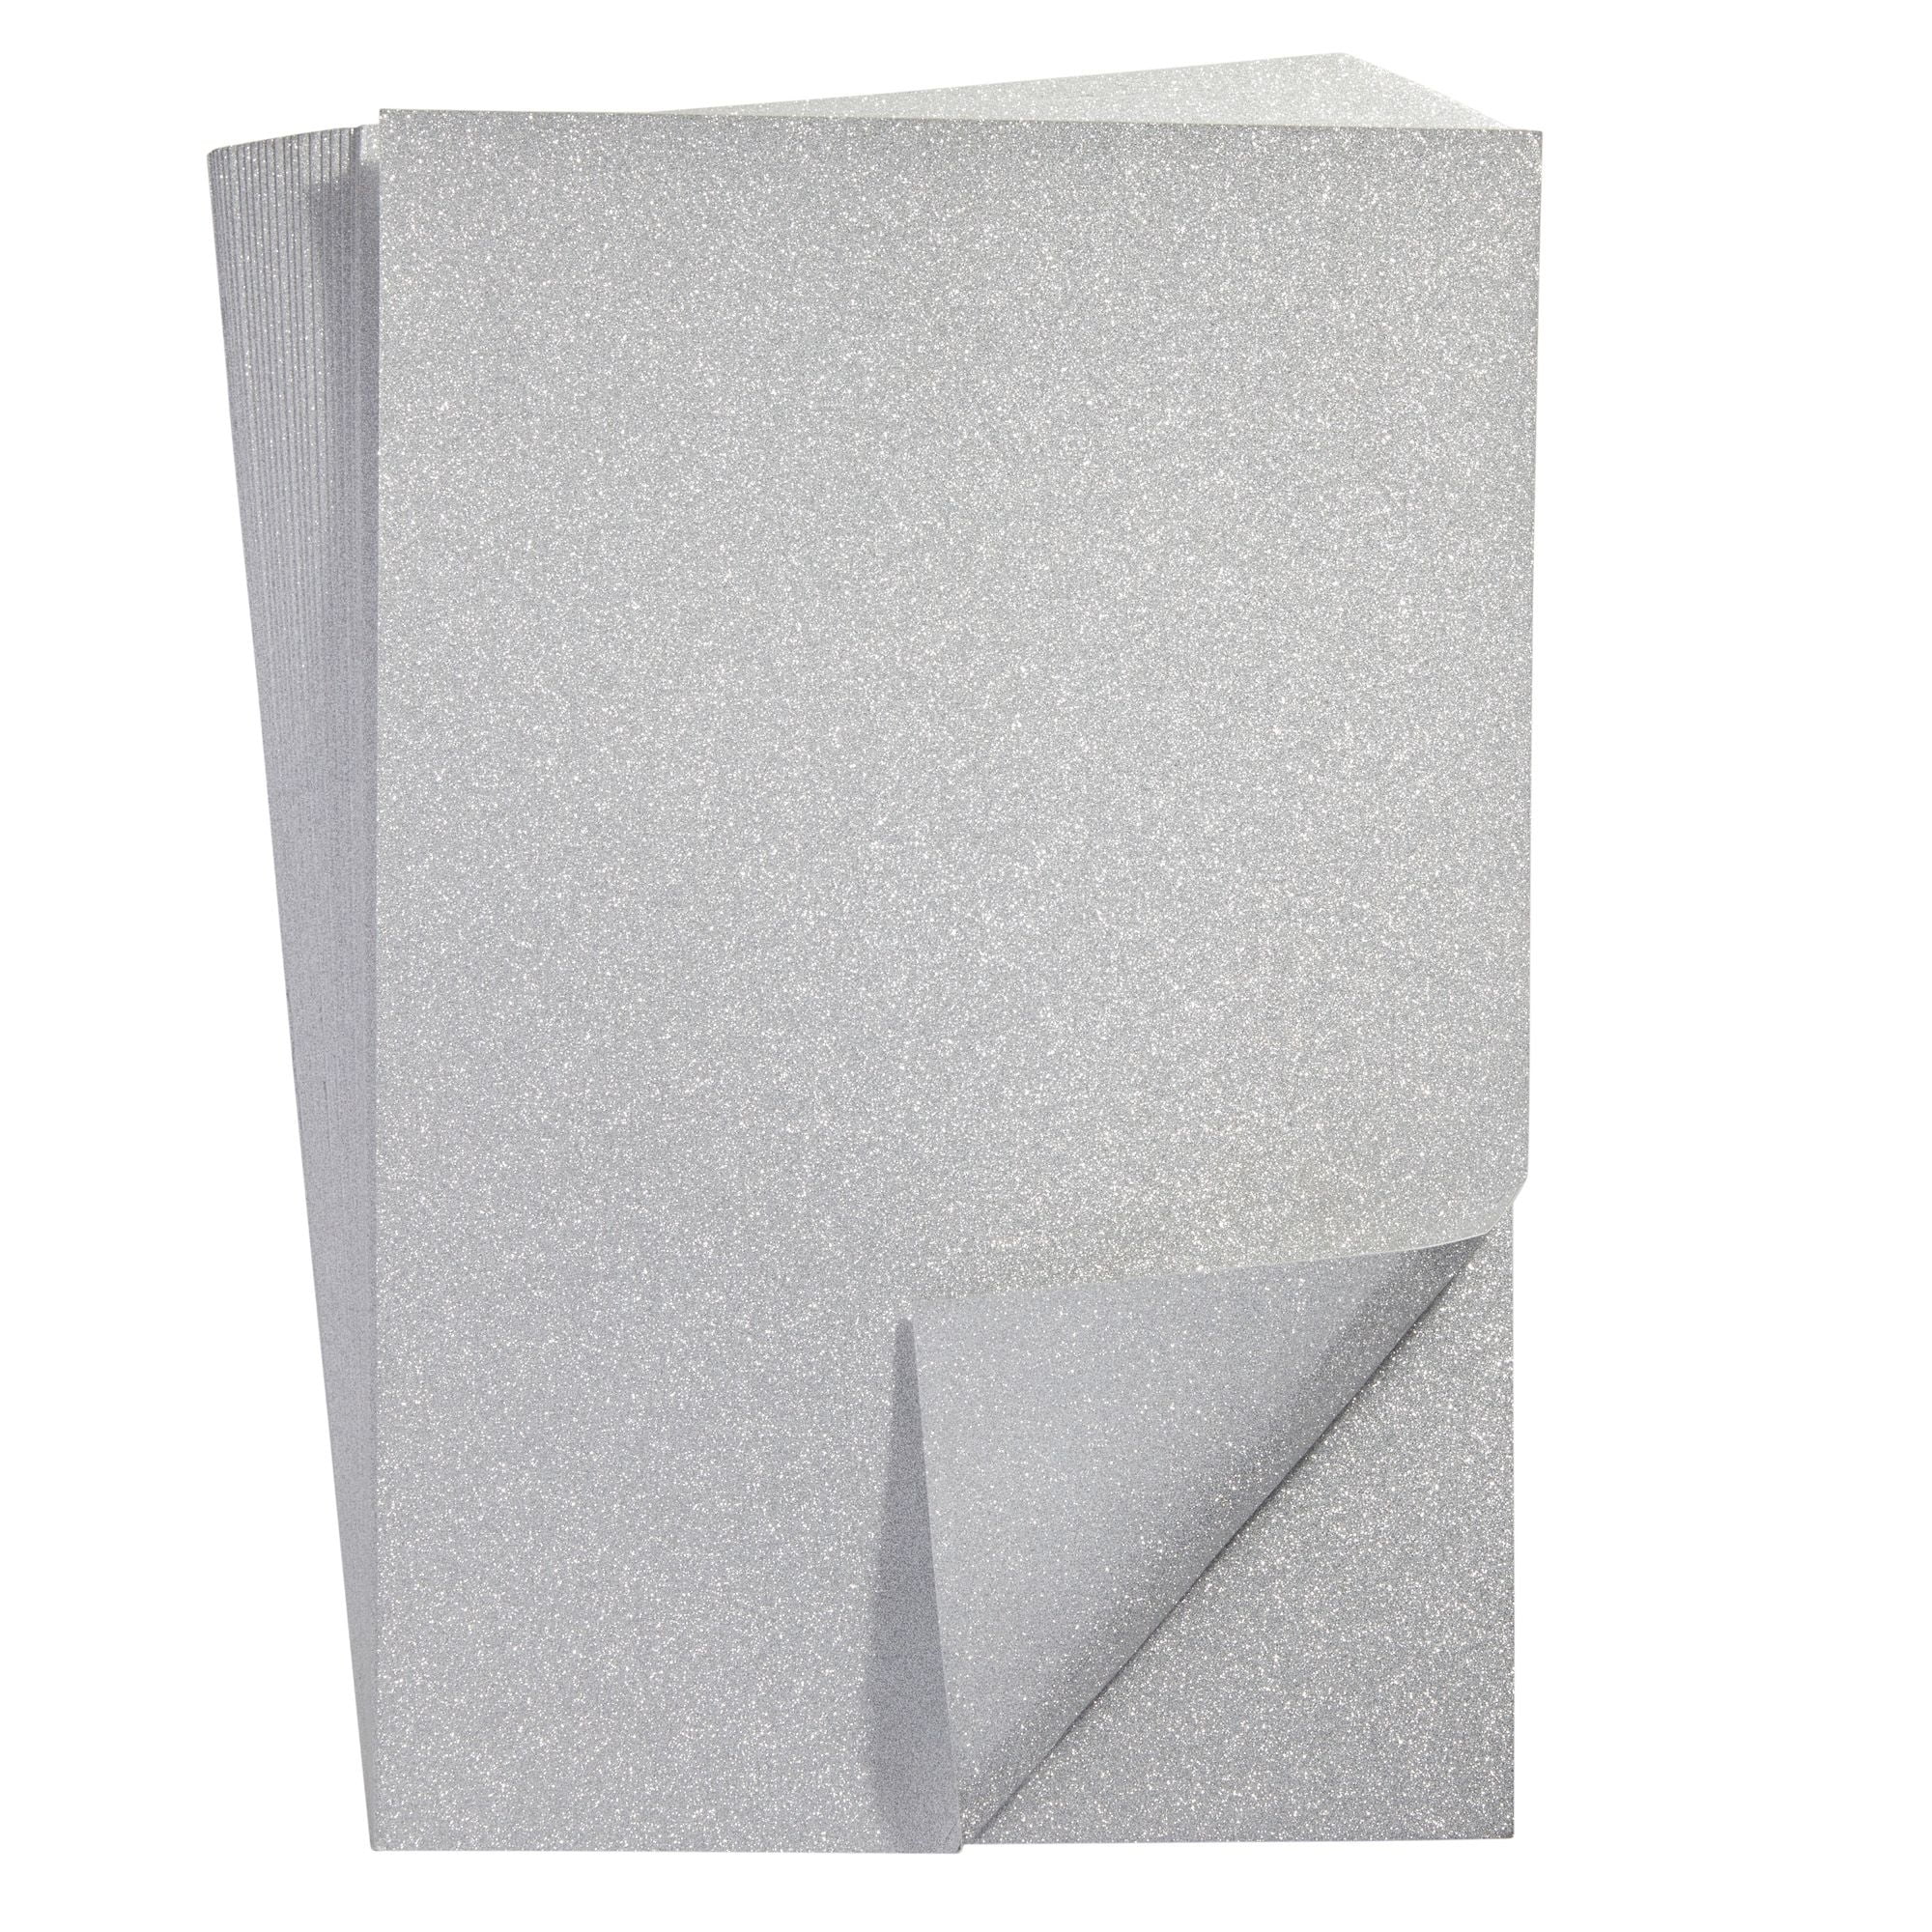 MirriSparkle Silver Glitter Cardstock Paper from Cardstock Warehouse 12 x 12 inch- 16 Pt/280gsm - 10 Sheets